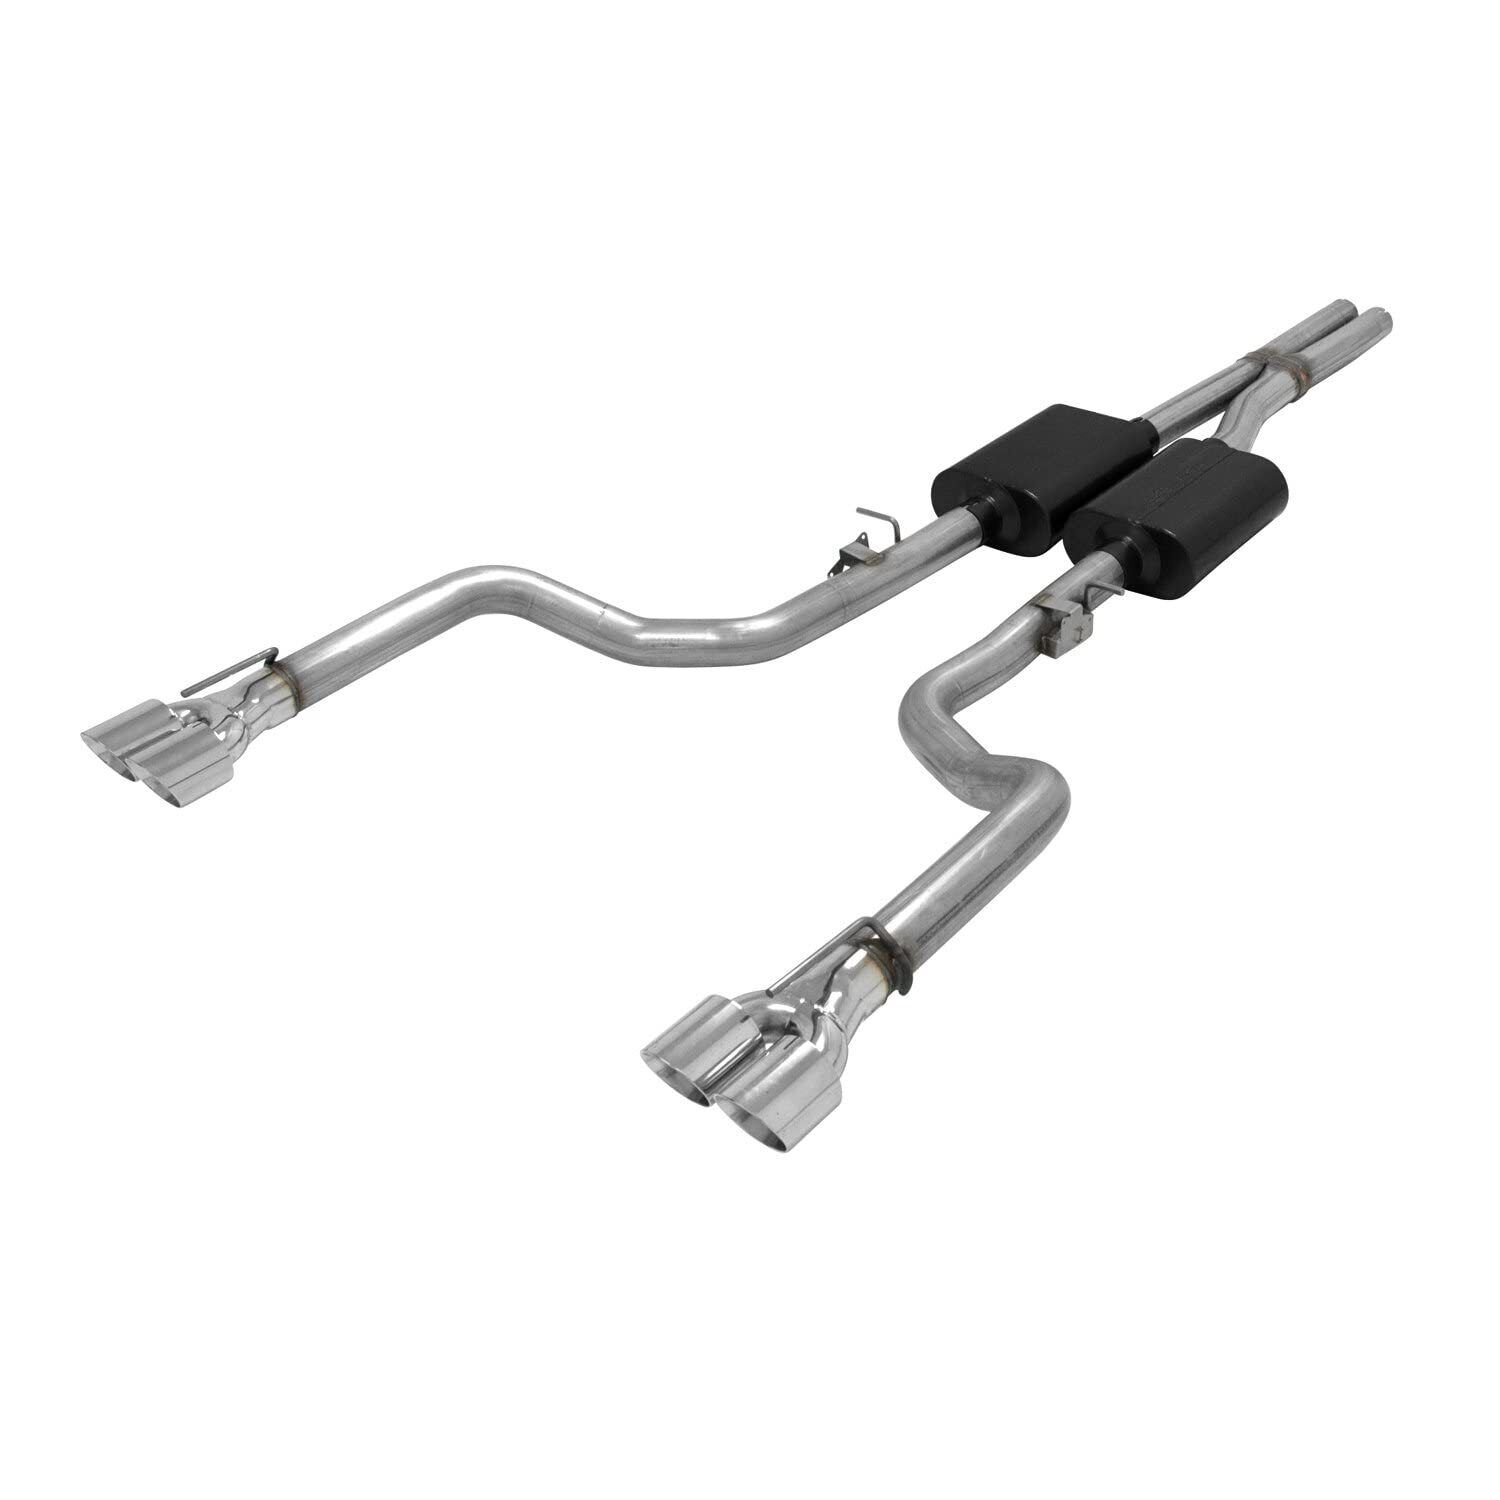 Flowmaster 817739 Exhaust System Kit